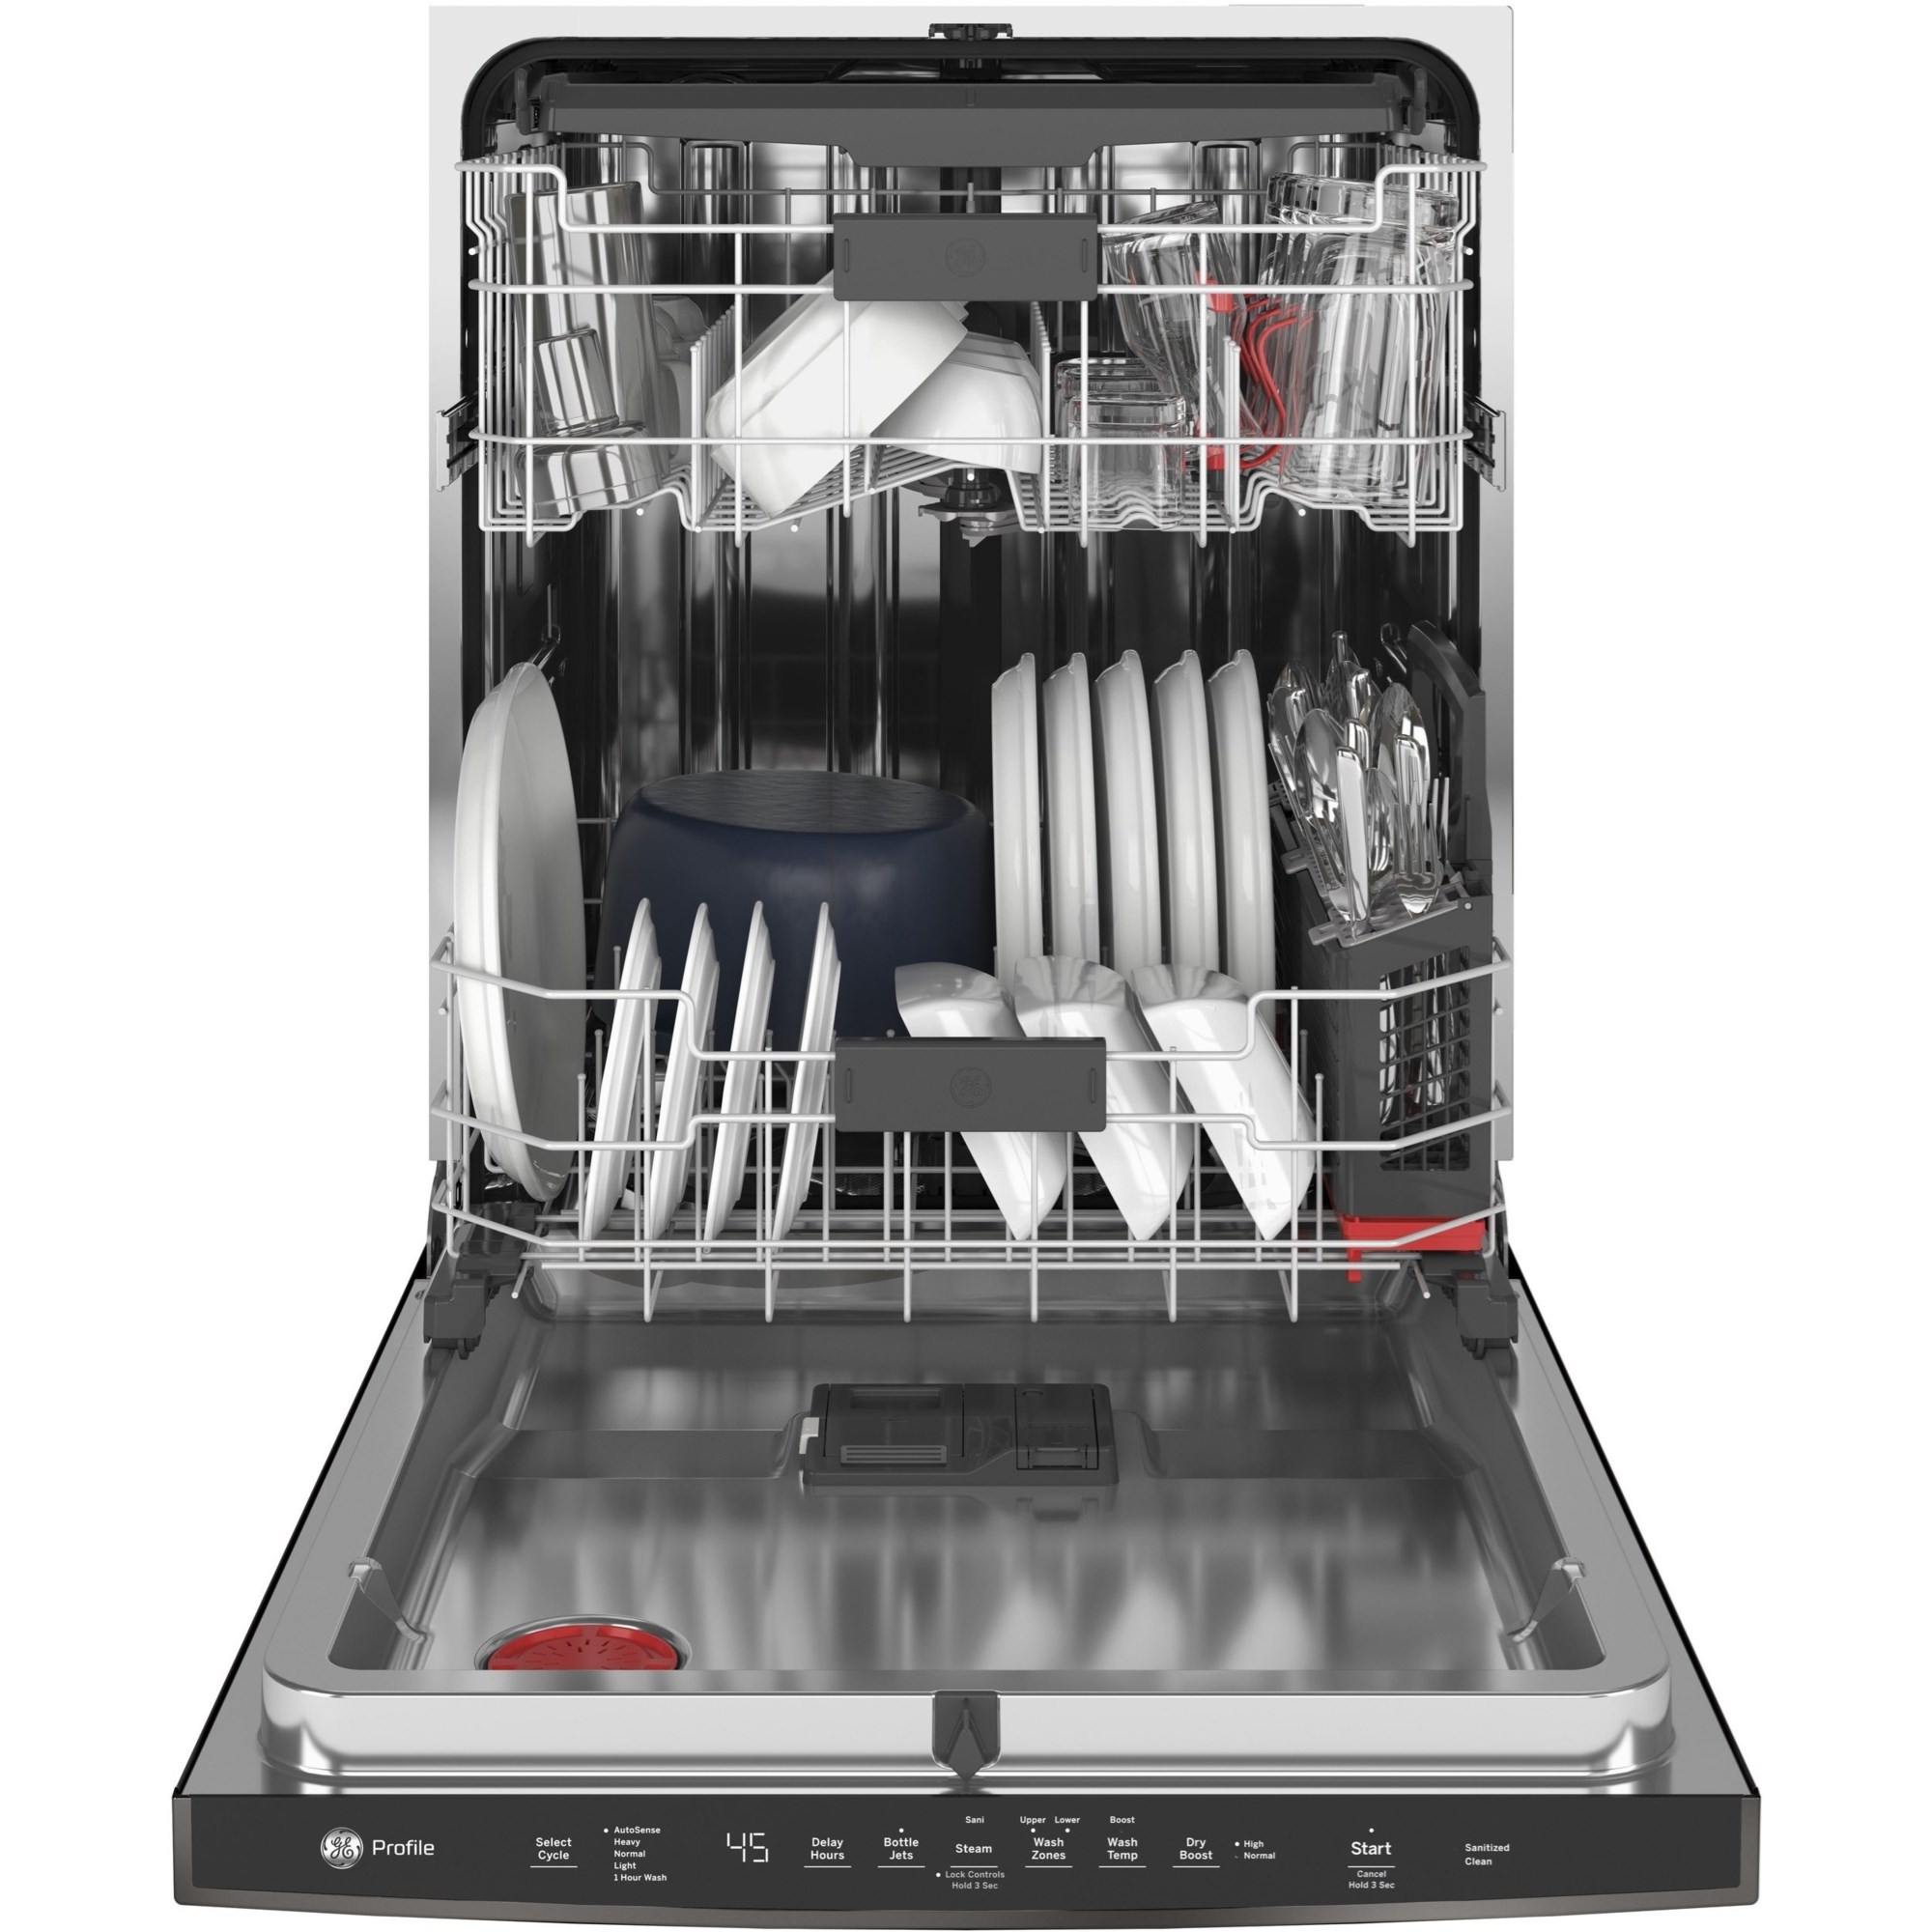 GE Appliances 24 Double Drawer Dishwasher in Stainless Steel